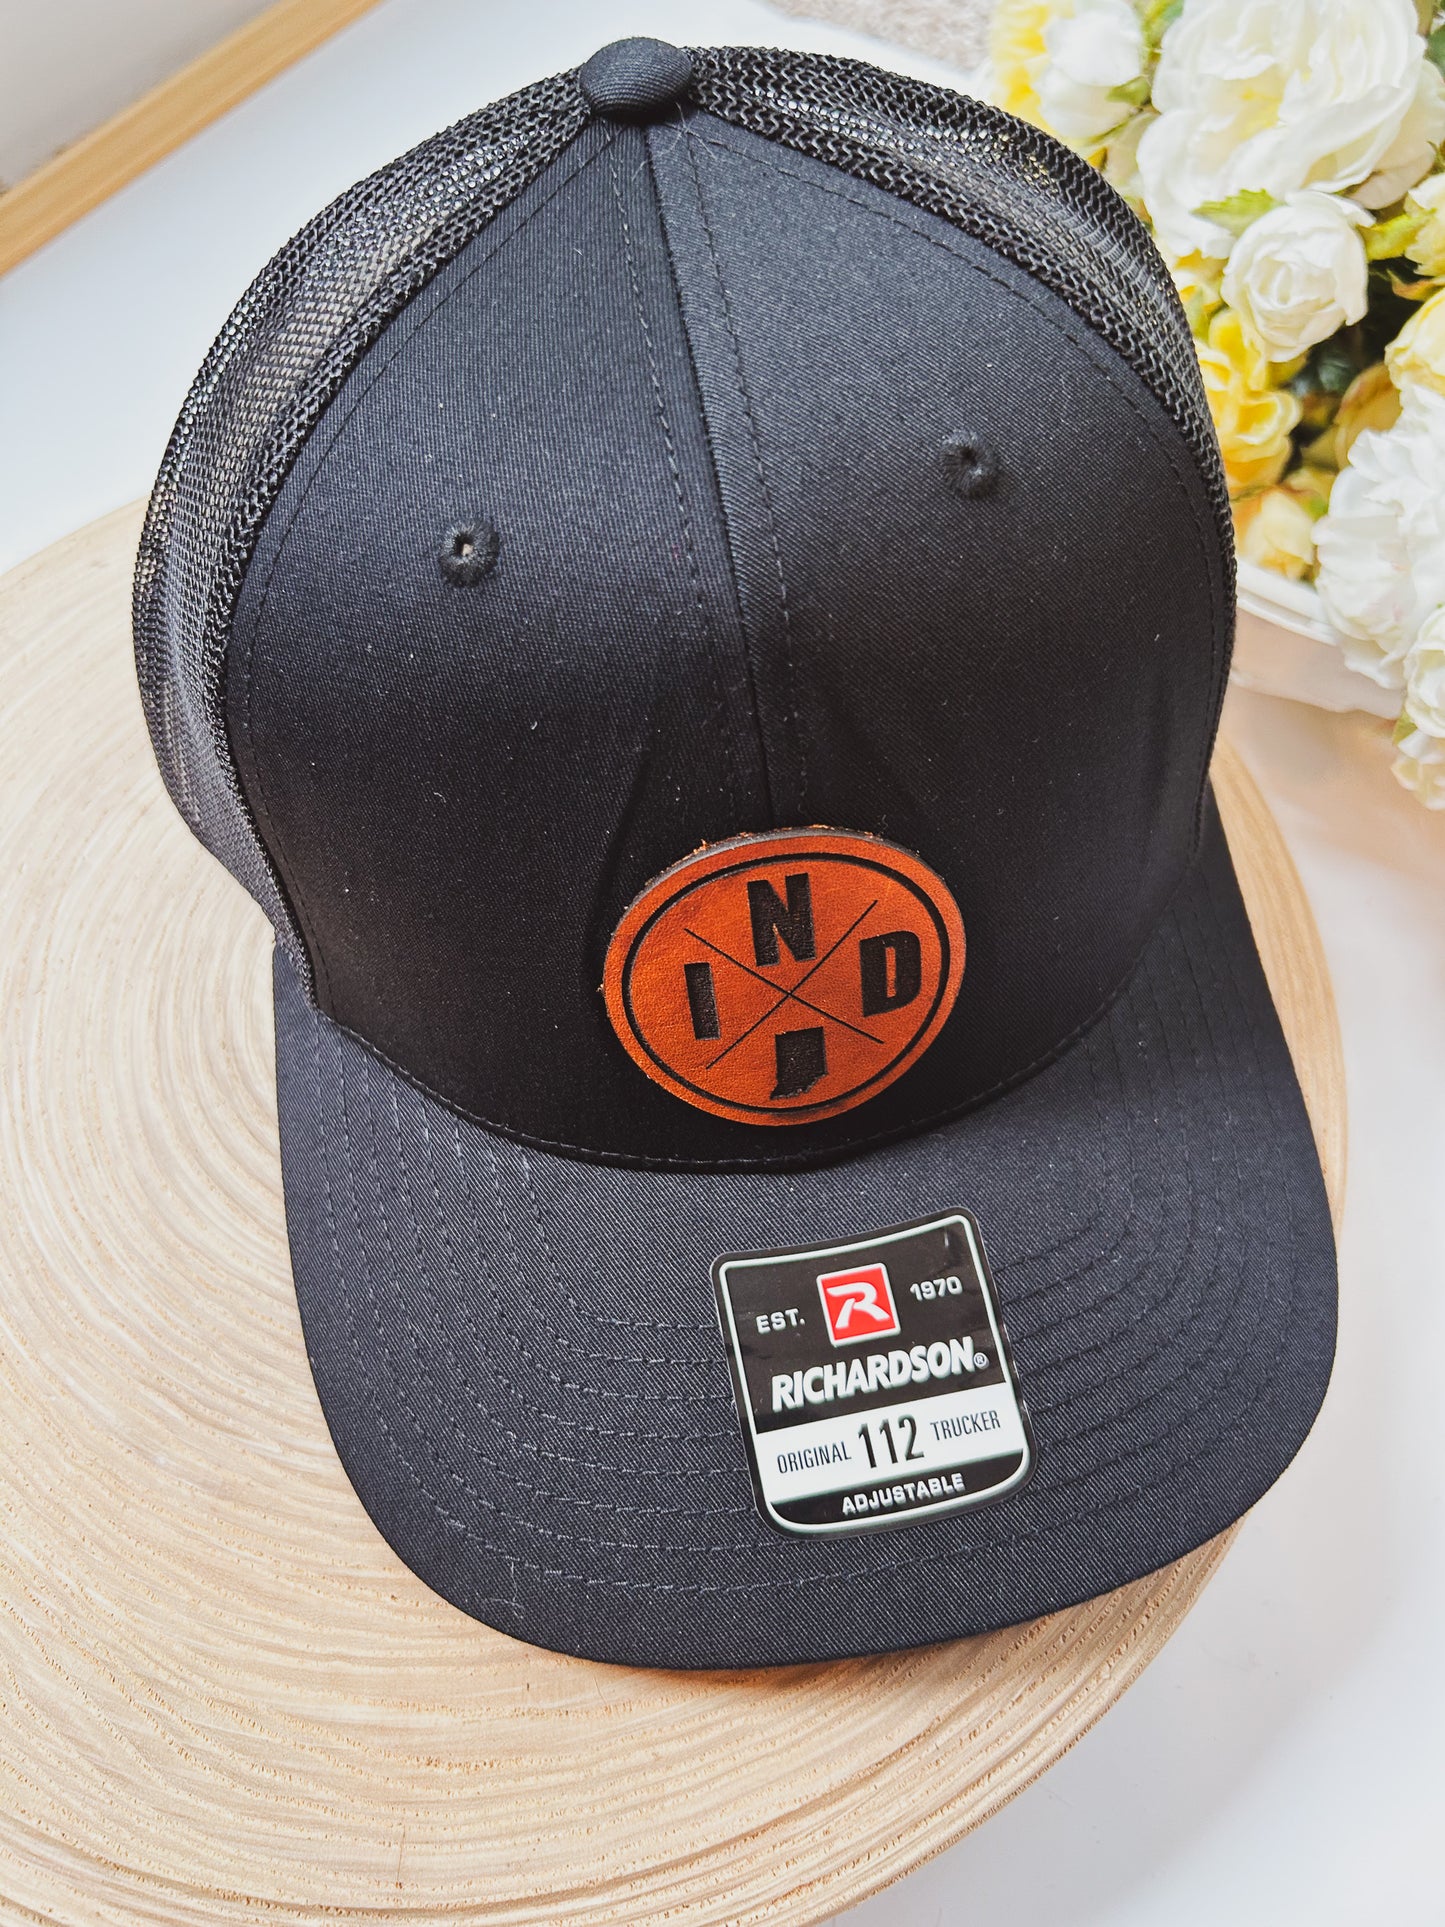 Circle IND Leather Patch on Black Richardson 112 Hat - Snap Closure